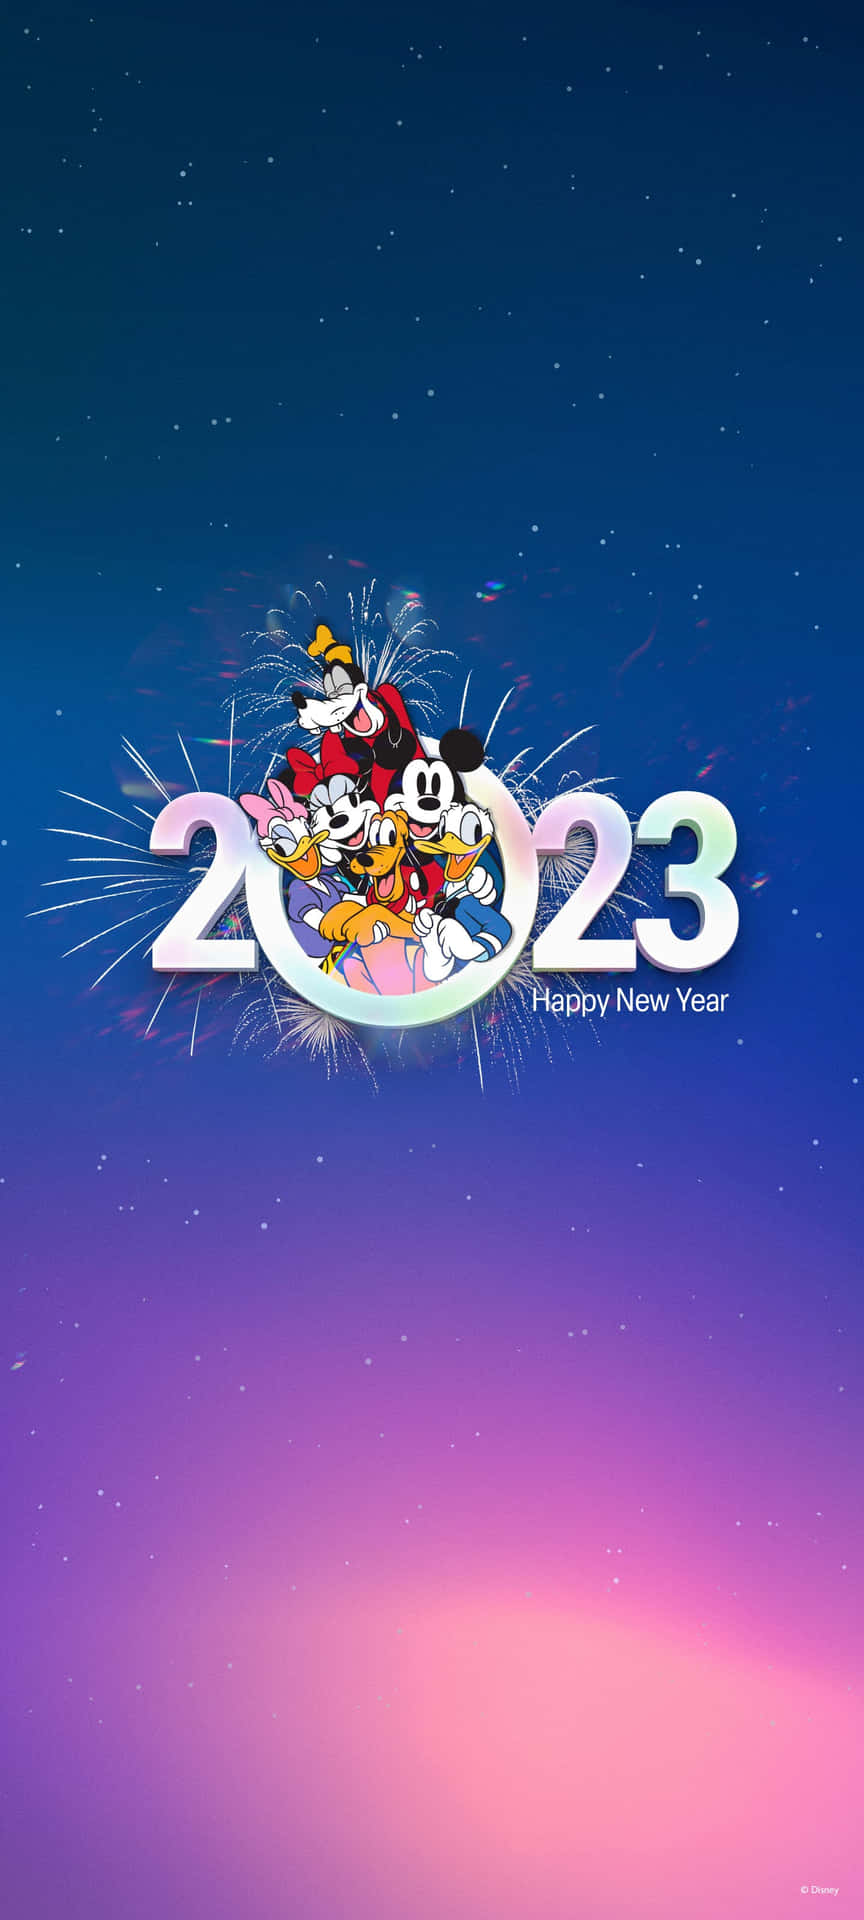 Happy New Year Mickey Mouse Iphone Wallpaper